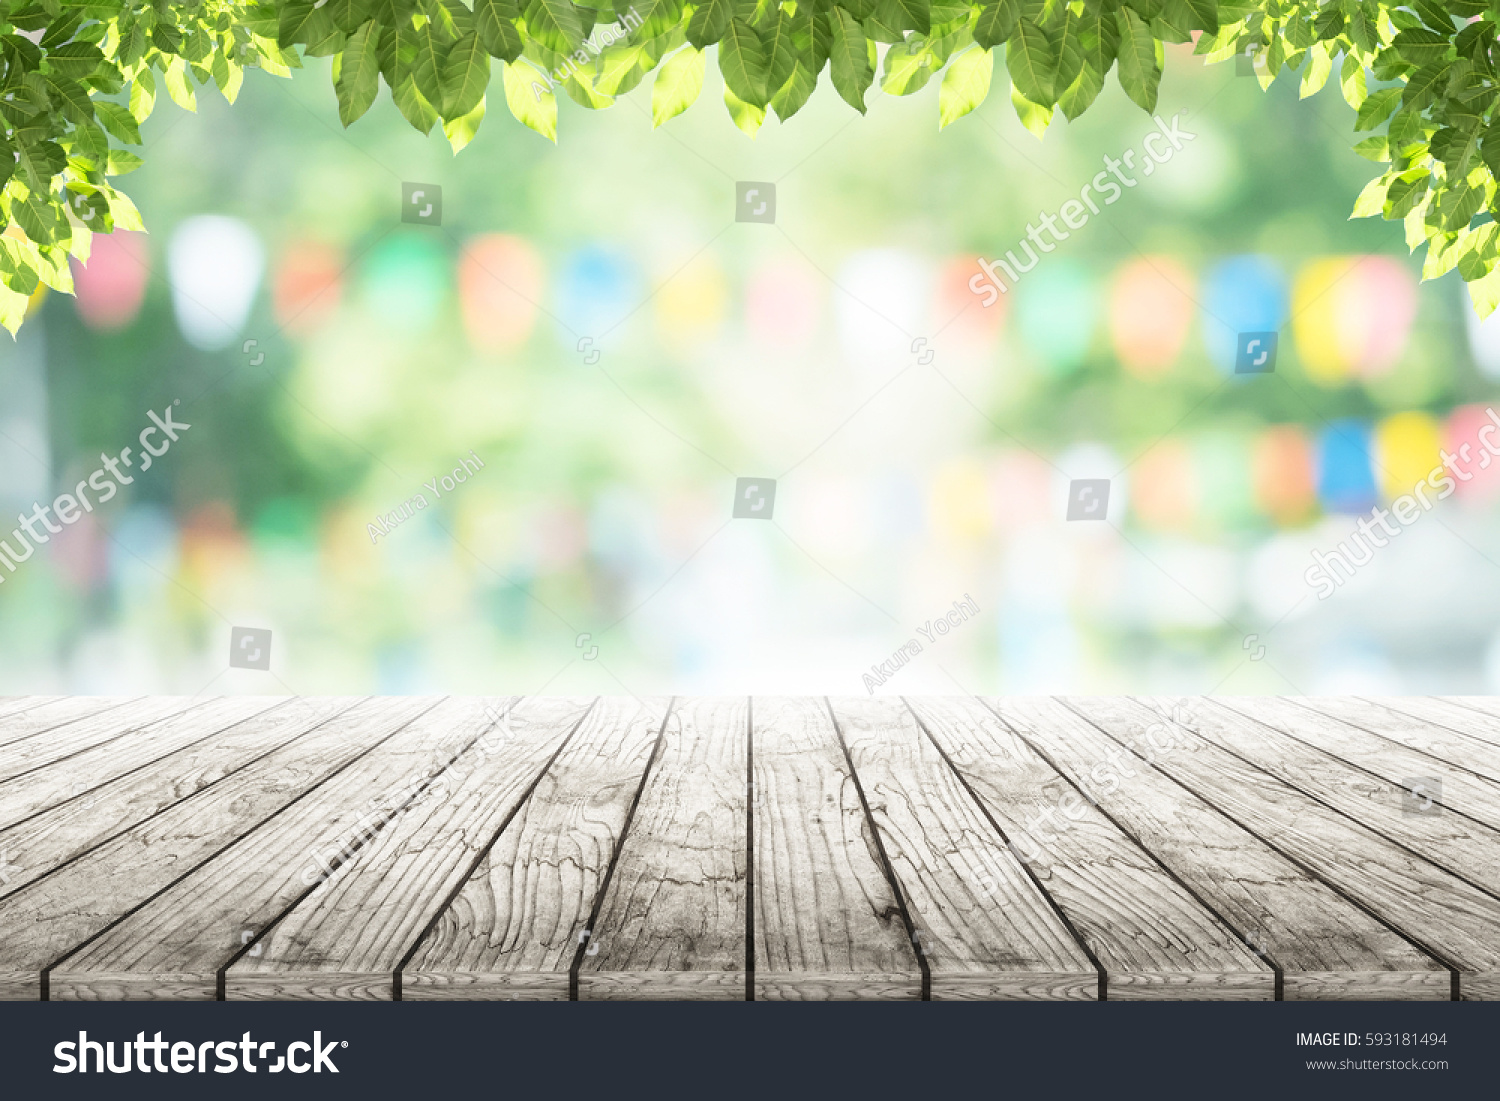 Empty Wooden Table Party Garden Background Stock Photo 593181494 ...